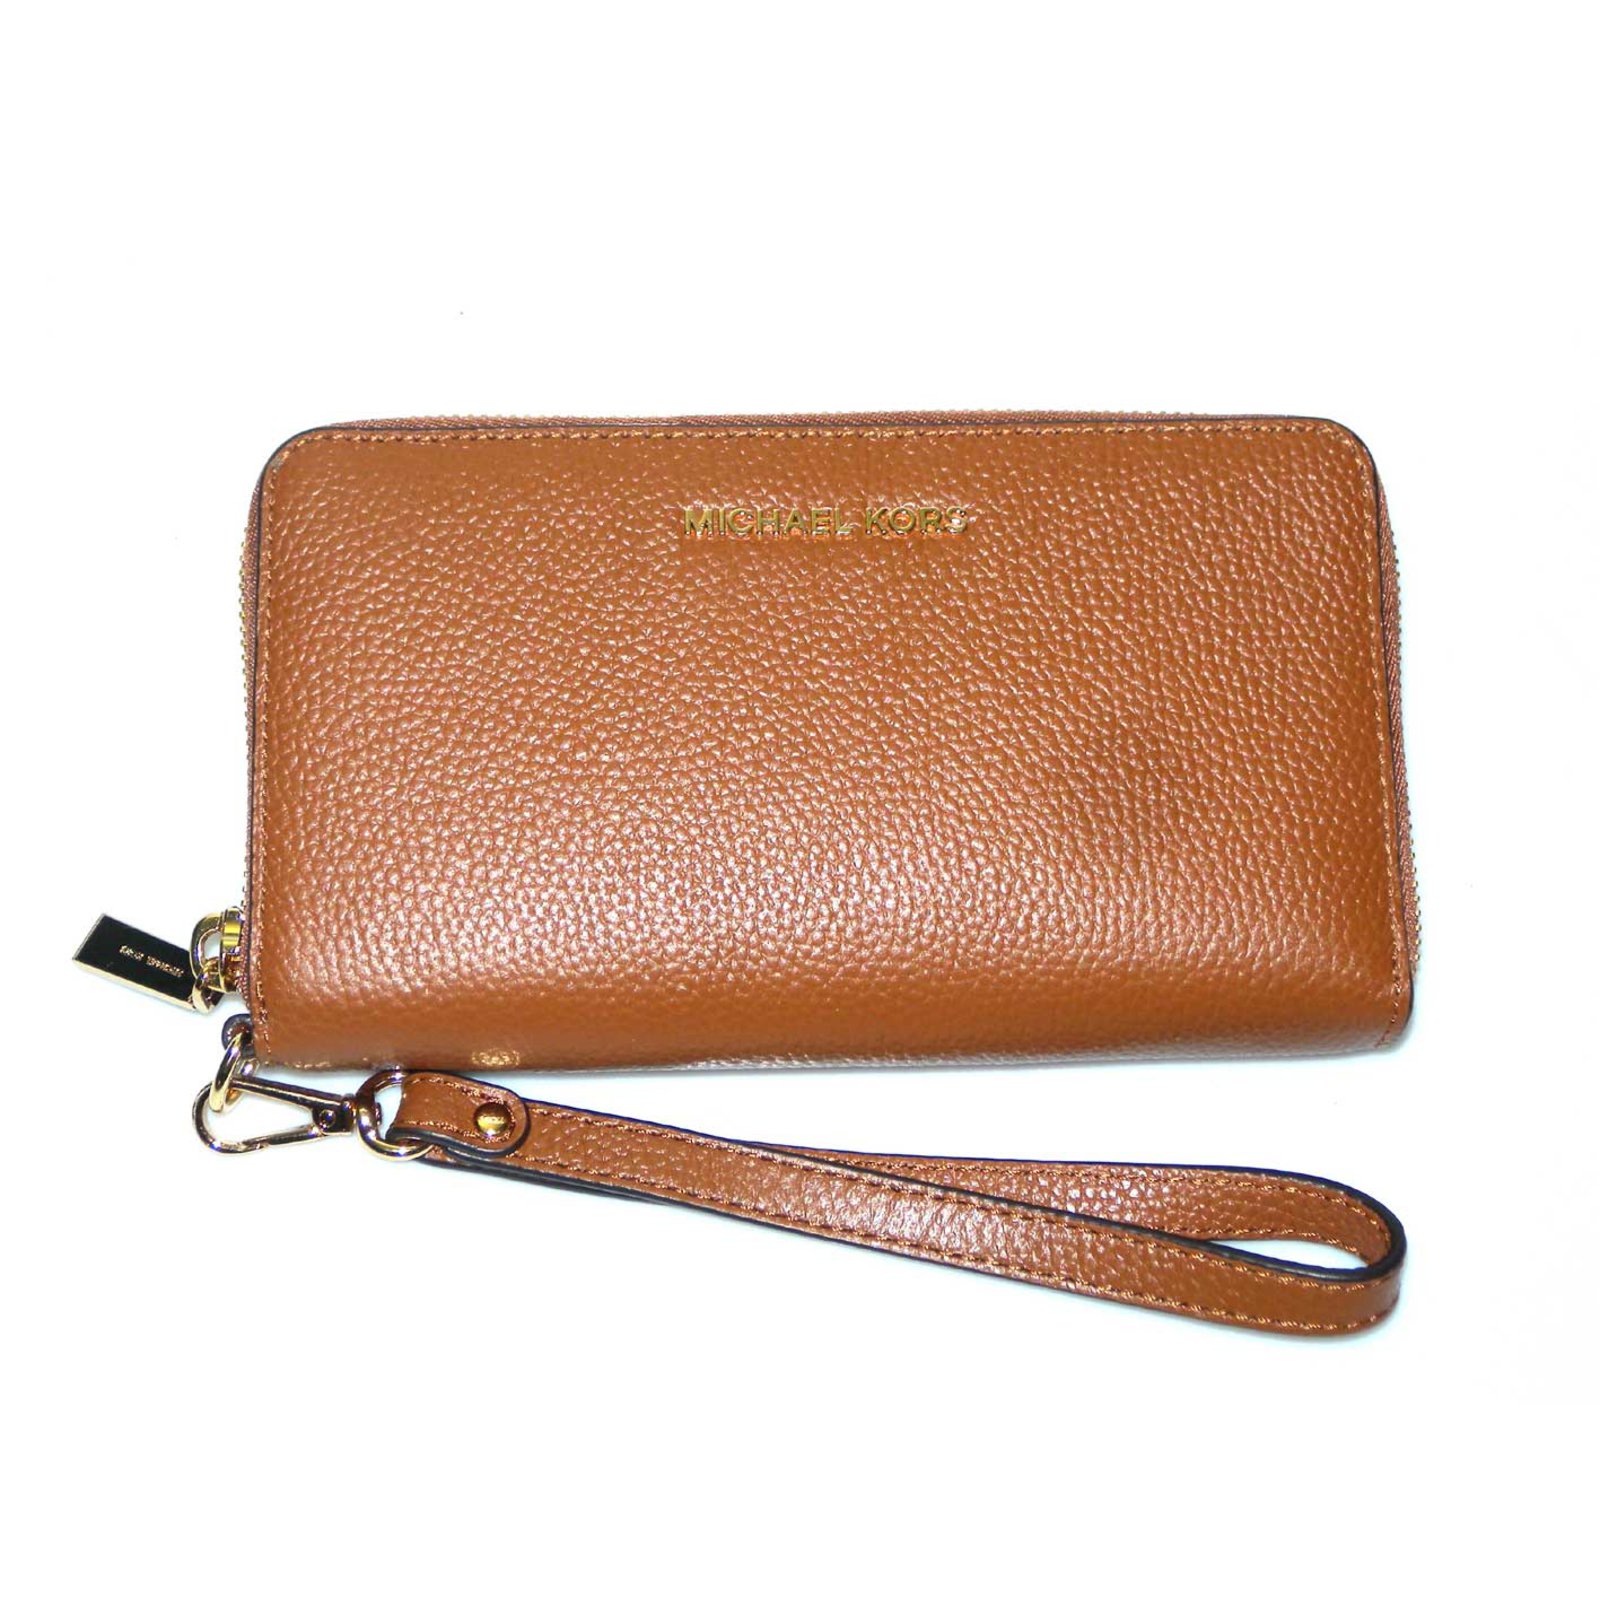 michael kors wallet with wrist strap